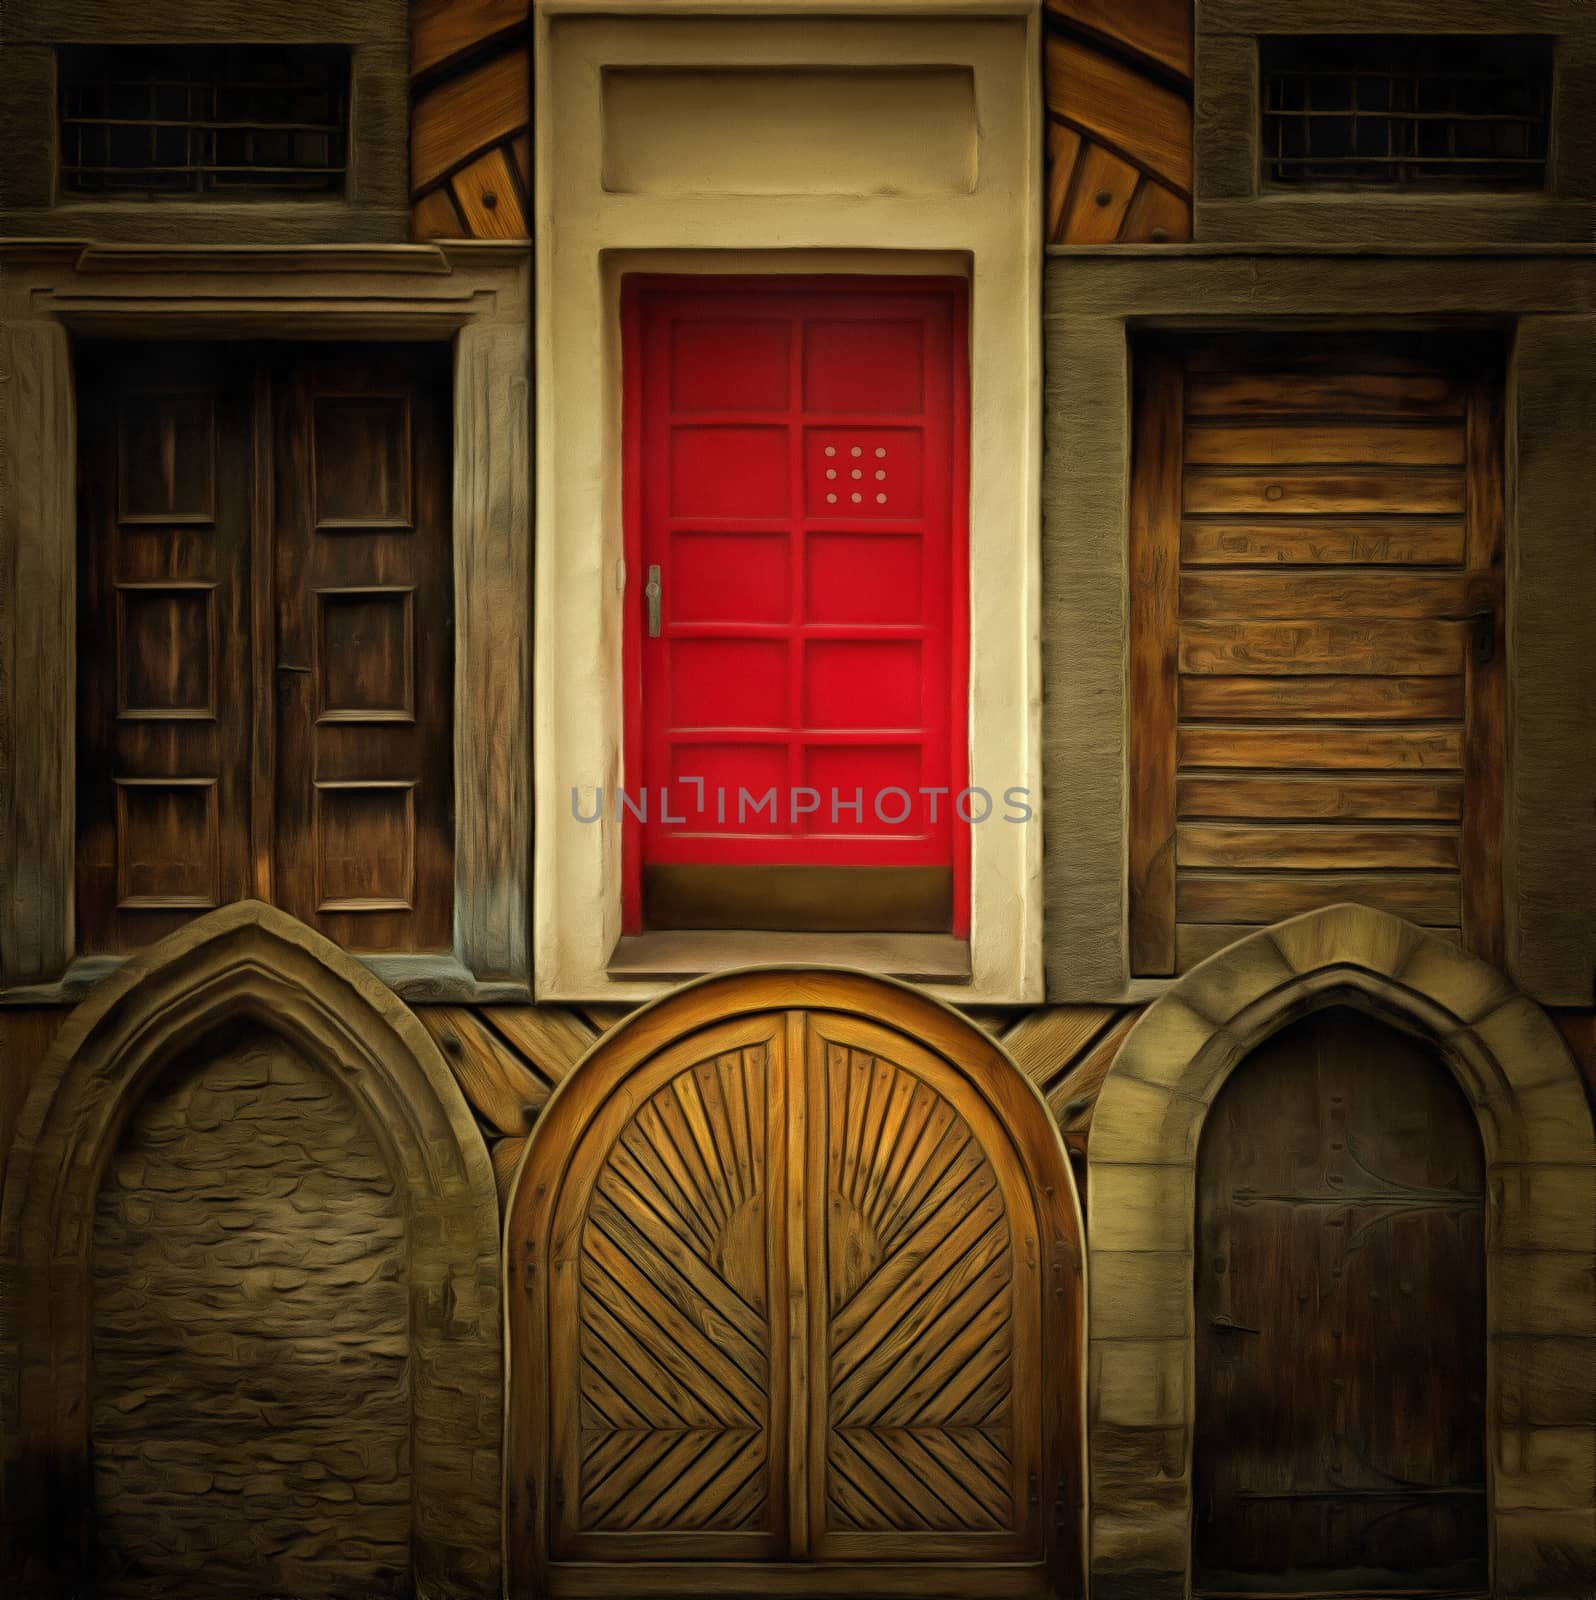 Abstract image of the old doors - digitally altered